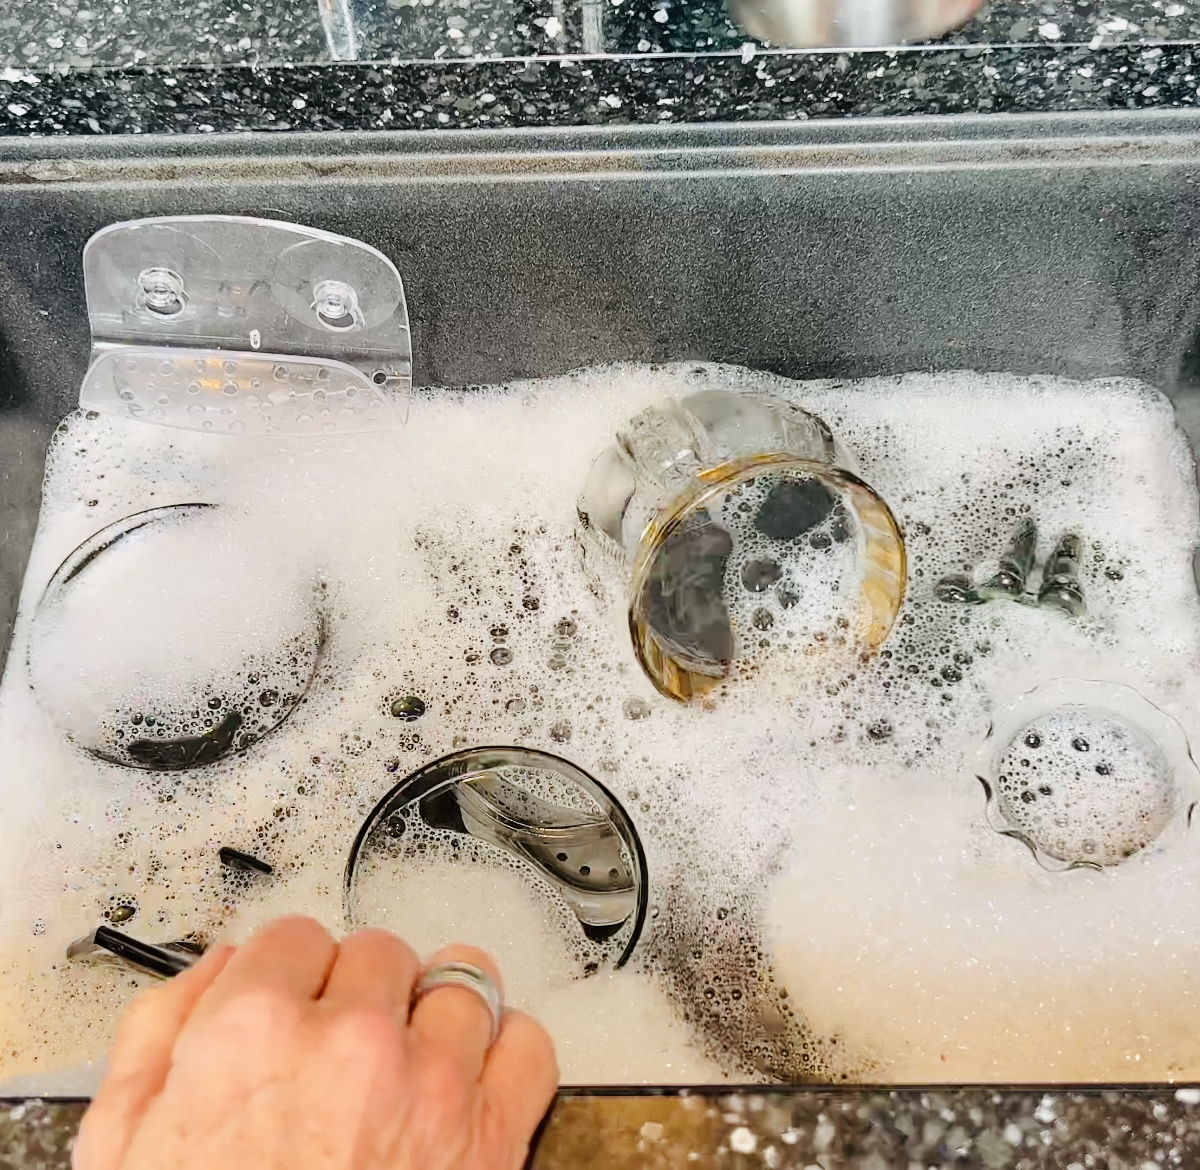 Clean the Dishes: Begin by soaking your old dishes in soapy water. This will help in removing any stickers and cleaning the glass.